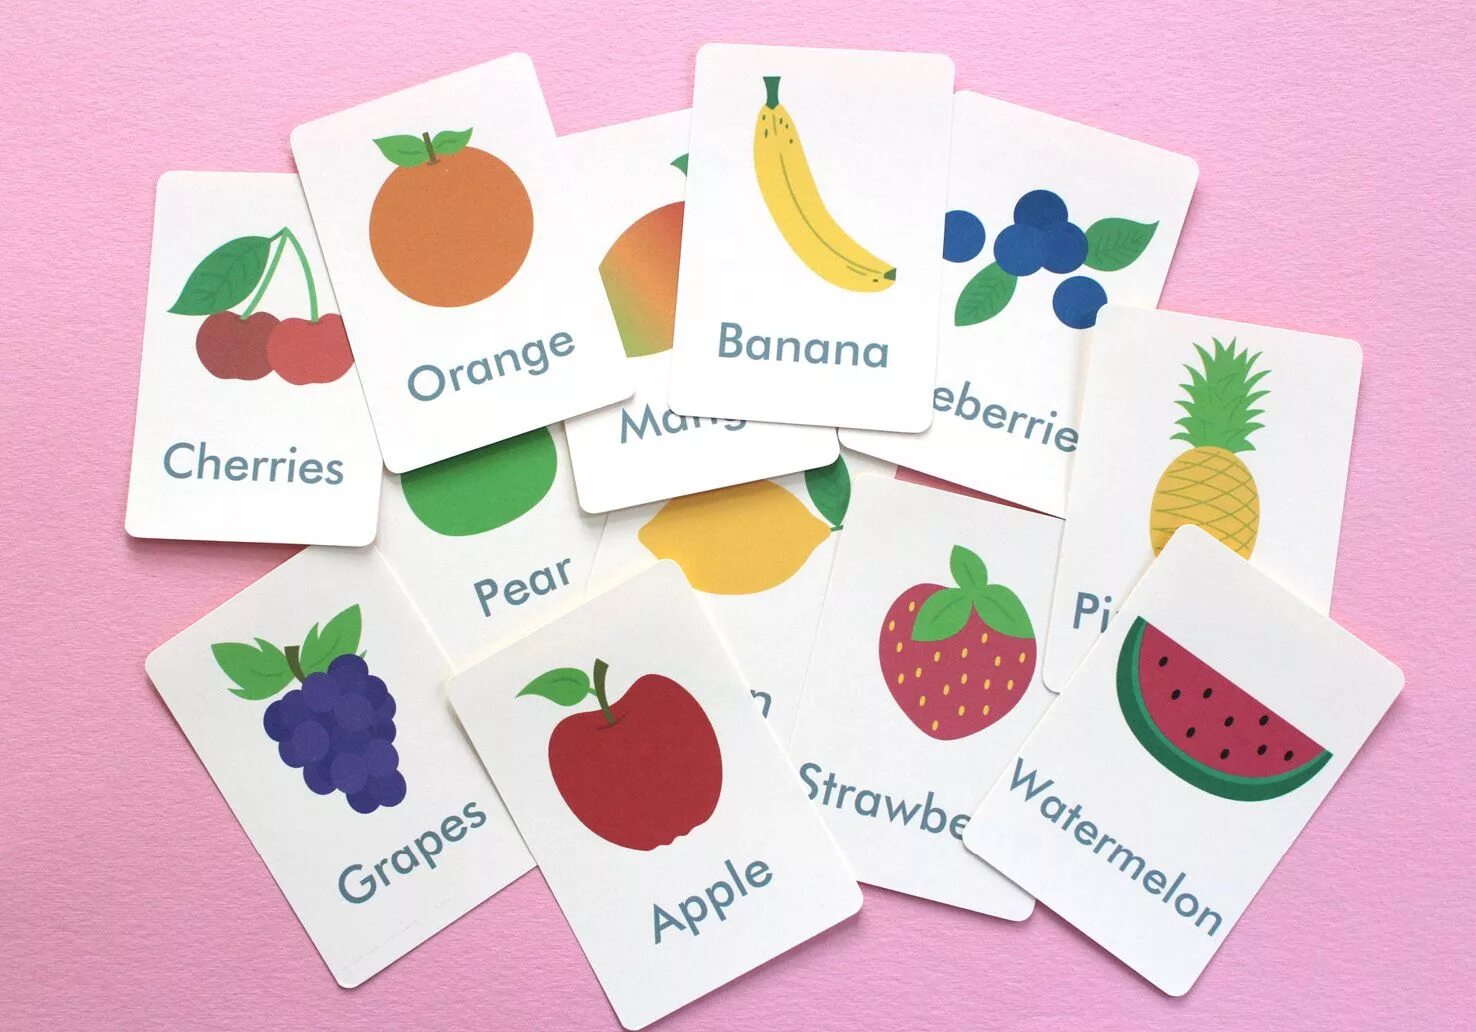 Printable cards. Флеш карточки английский. Fruits and Vegetables Cards. Fruits Cards for Kids. Fruits Flashcards Printable.